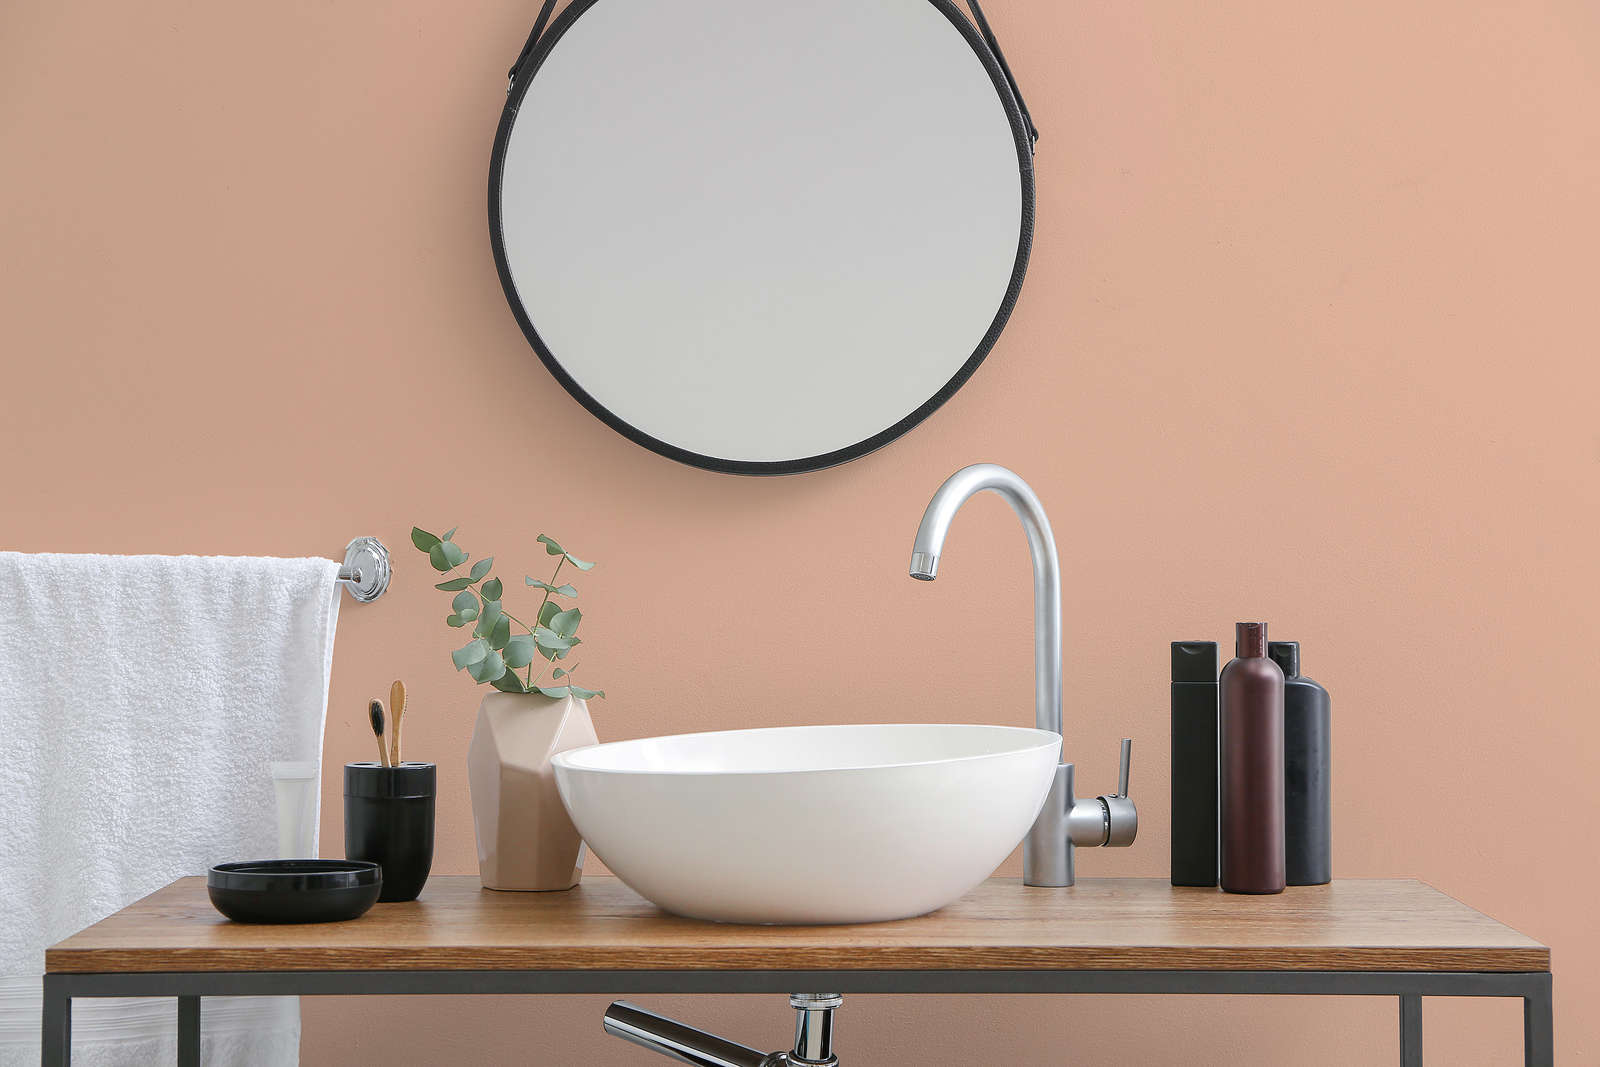             Premium Wall Paint serene salmon »Active Apricot« NW912 – 5 litre
        